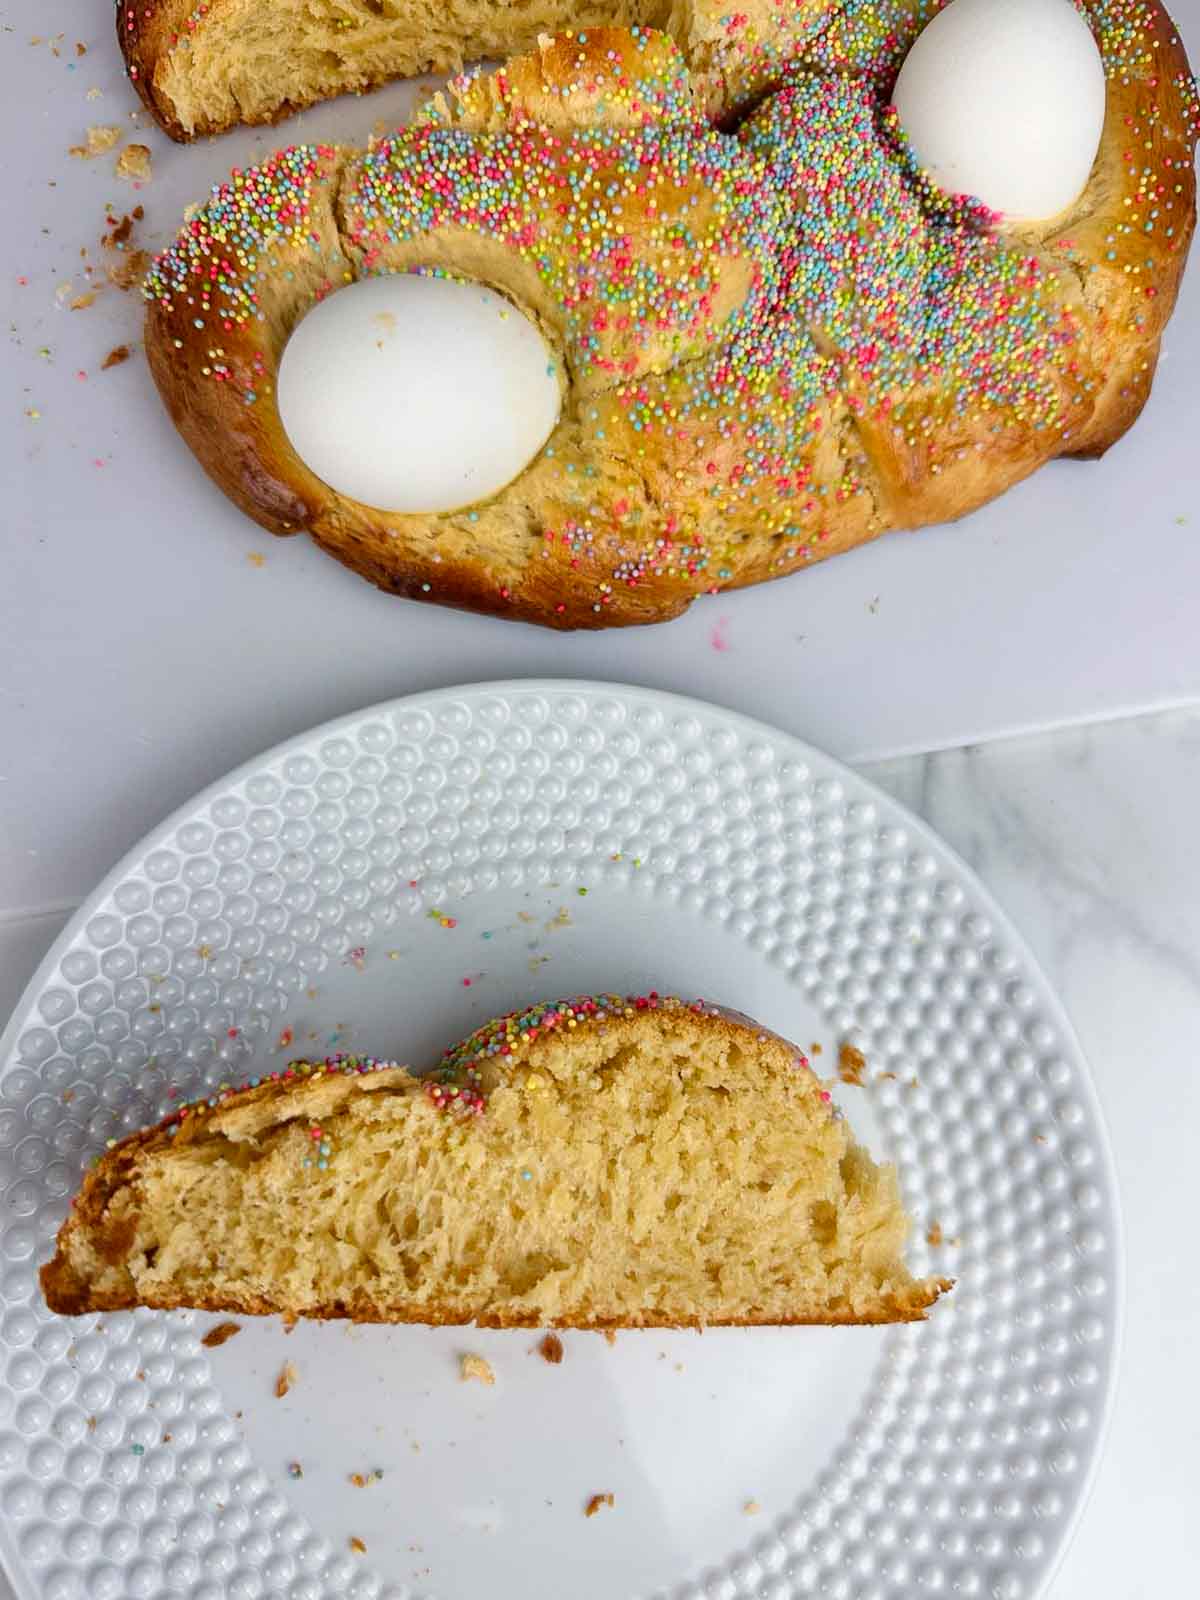 Italian Easter bread is a traditional slightly sweet brioche style perfect for the springtime holiday. This fluffy, braided bread dotted with eggs and sprinkles is a festive addition to your Easter brunch.